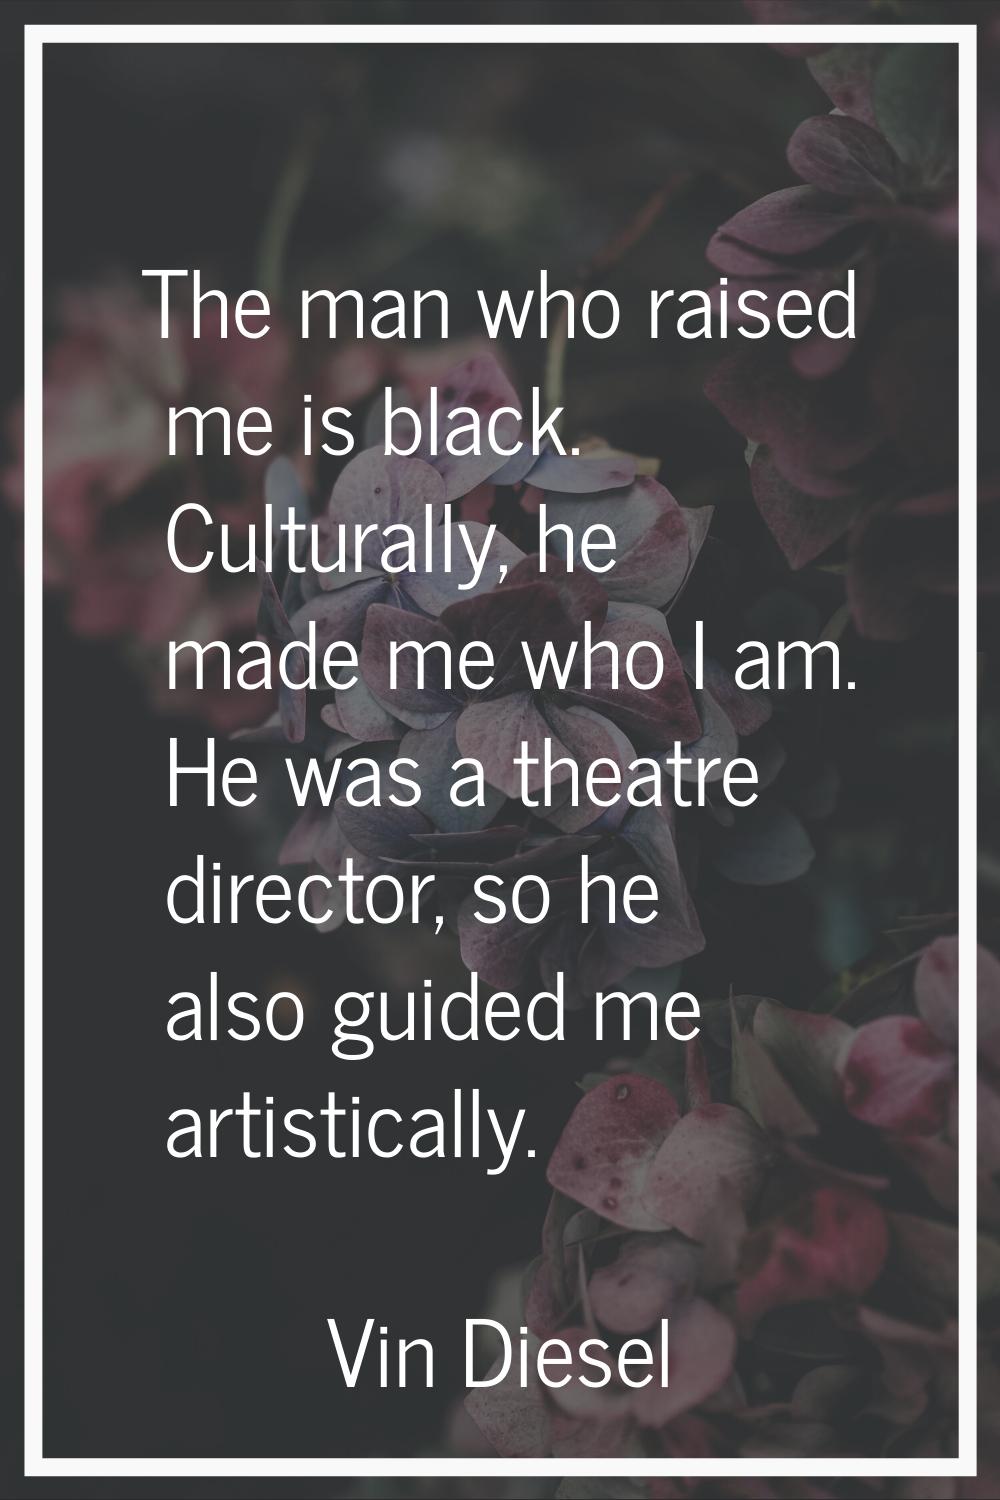 The man who raised me is black. Culturally, he made me who I am. He was a theatre director, so he a